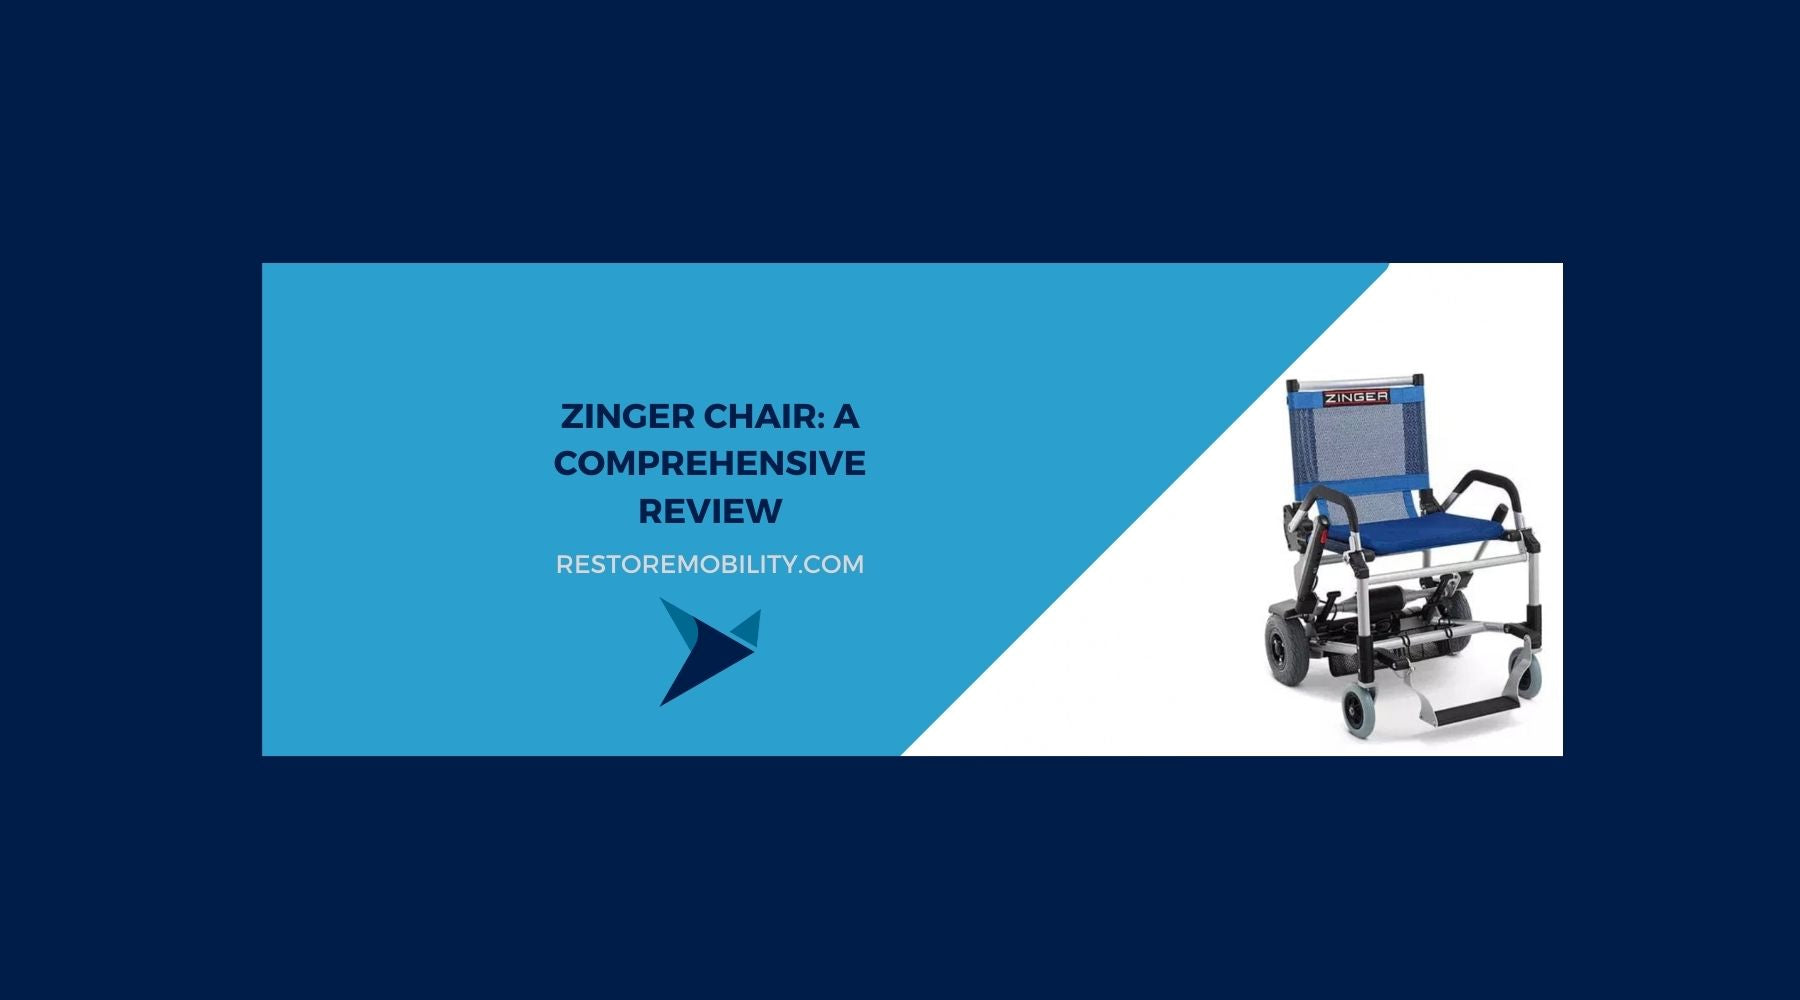 Zinger Chair: A Comprehensive Review